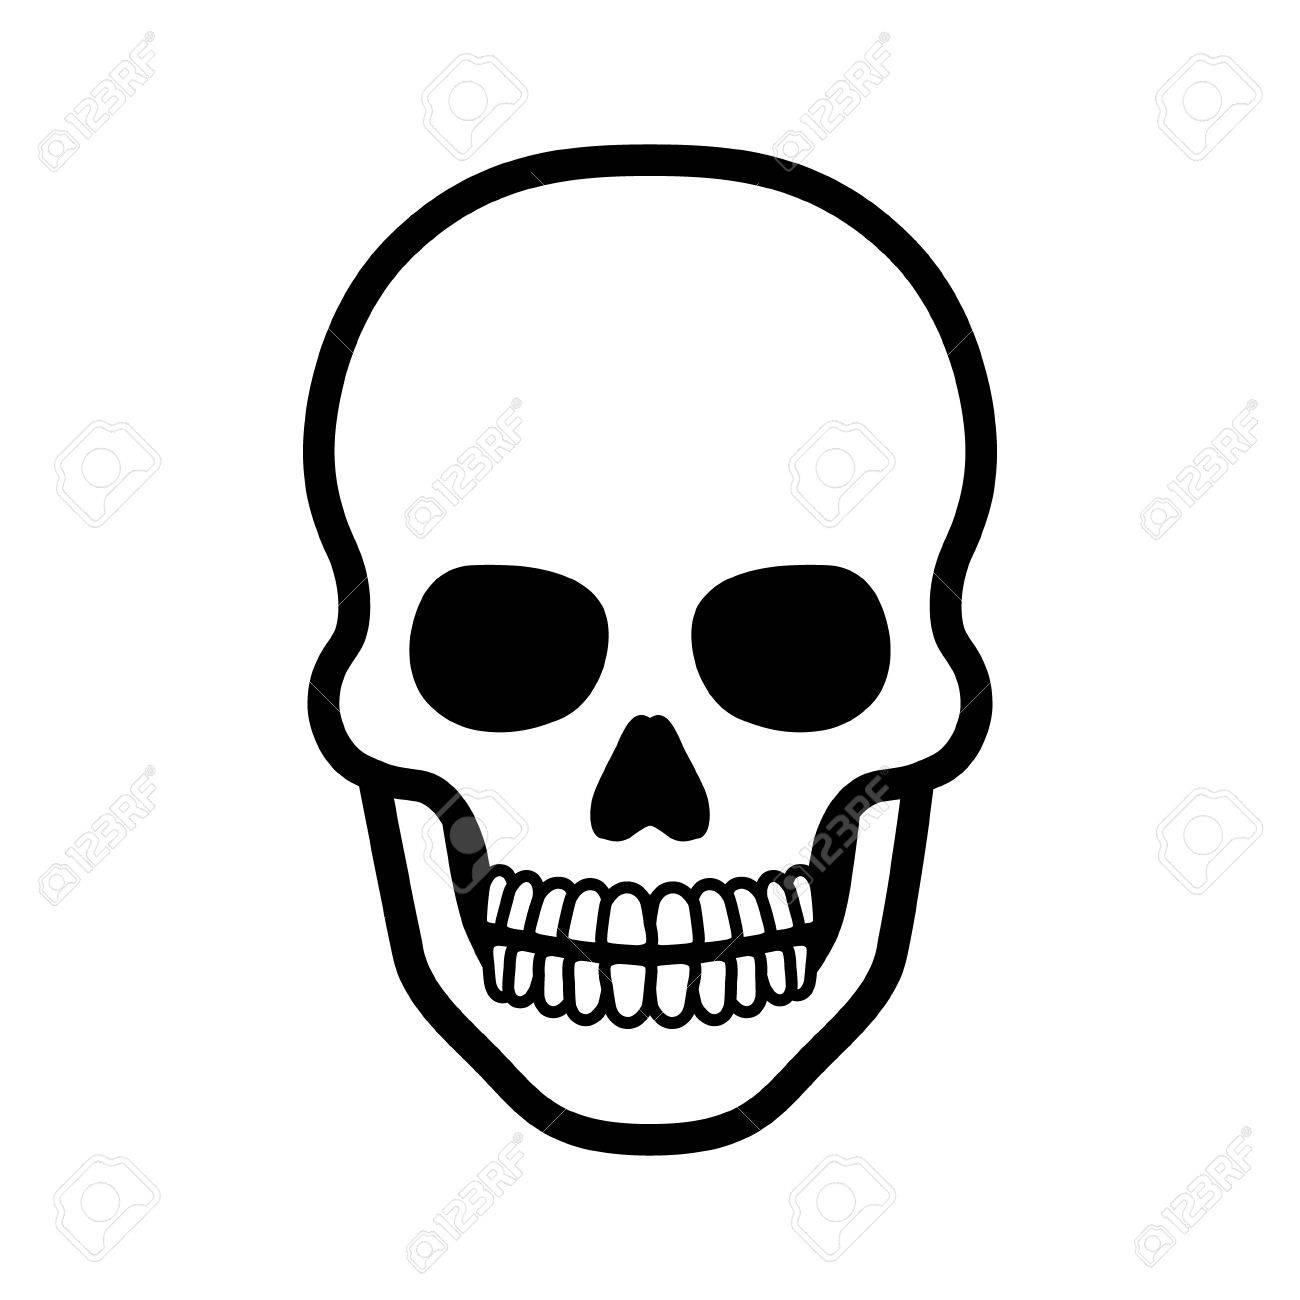 Death skull or human skull line art icon for games and websites.